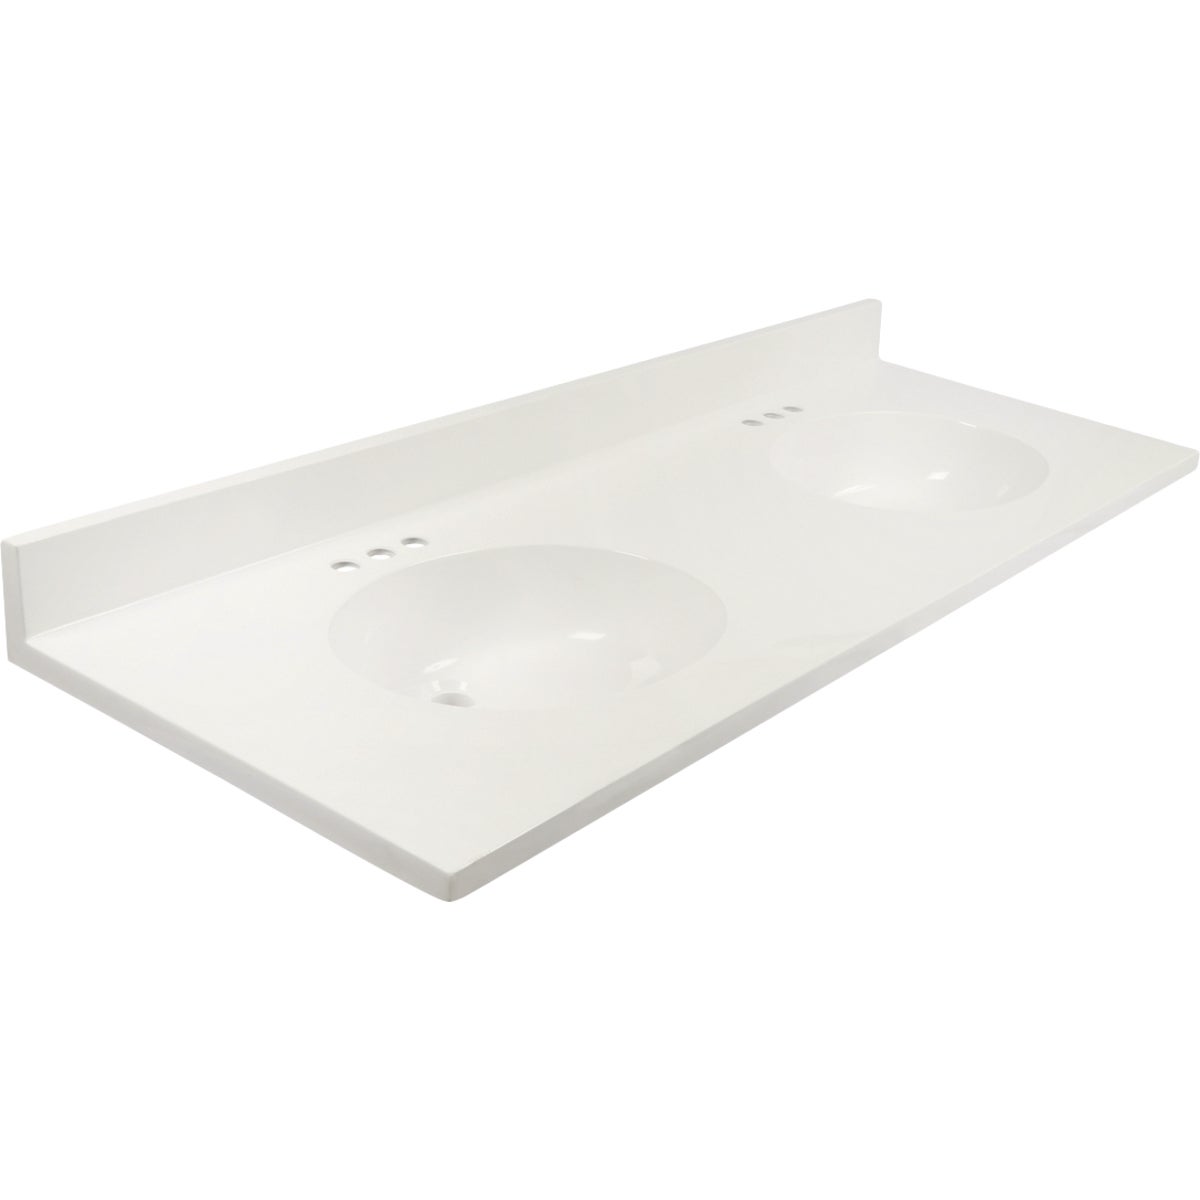 Modular Vanity Tops 61 In. W x 22 In. D Solid White Cultured Marble Flat Edge Double Sink Vanity Top with Oval Bowl